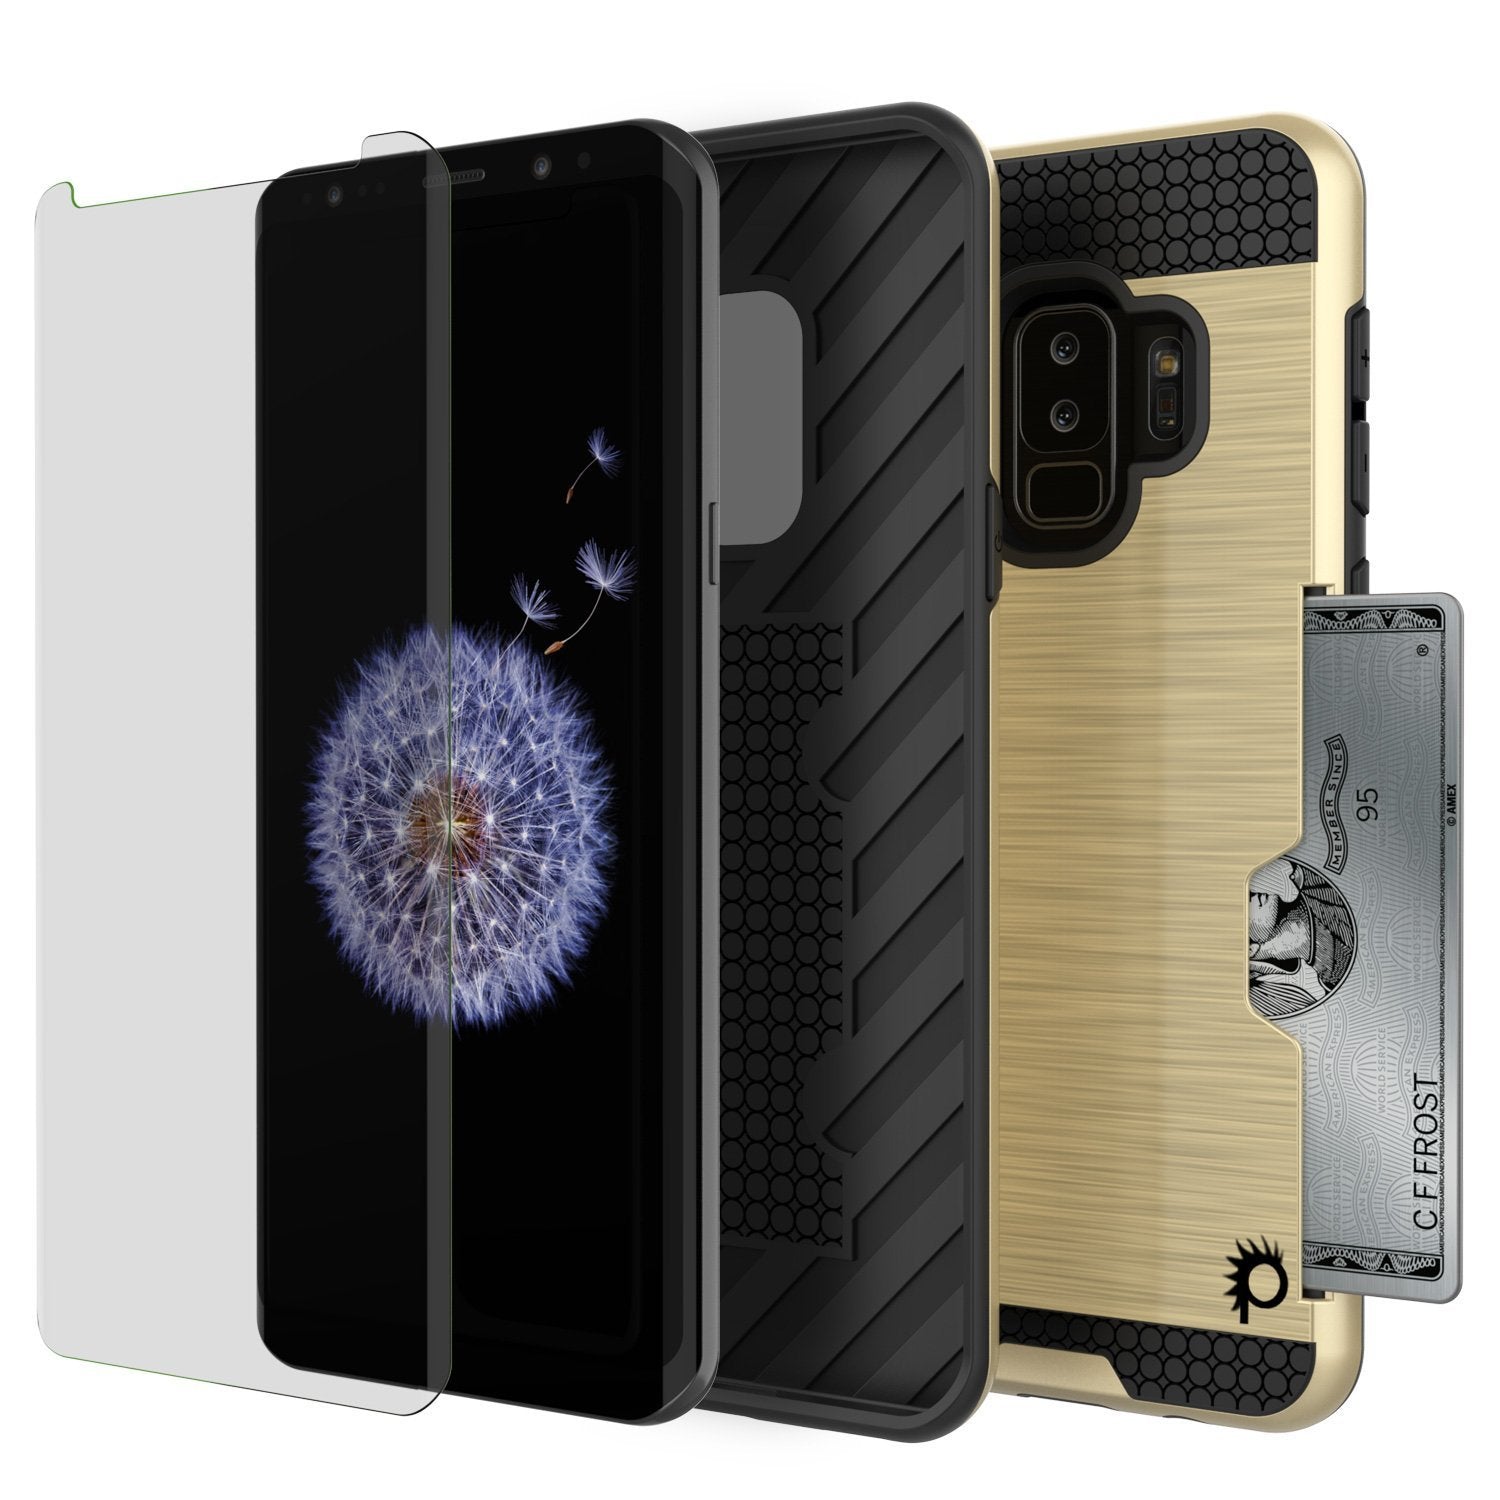 Galaxy S9 Plus Case, PUNKcase [SLOT Series] [Slim Fit] Dual-Layer Armor Cover w/Integrated Anti-Shock System [Gold] - PunkCase NZ